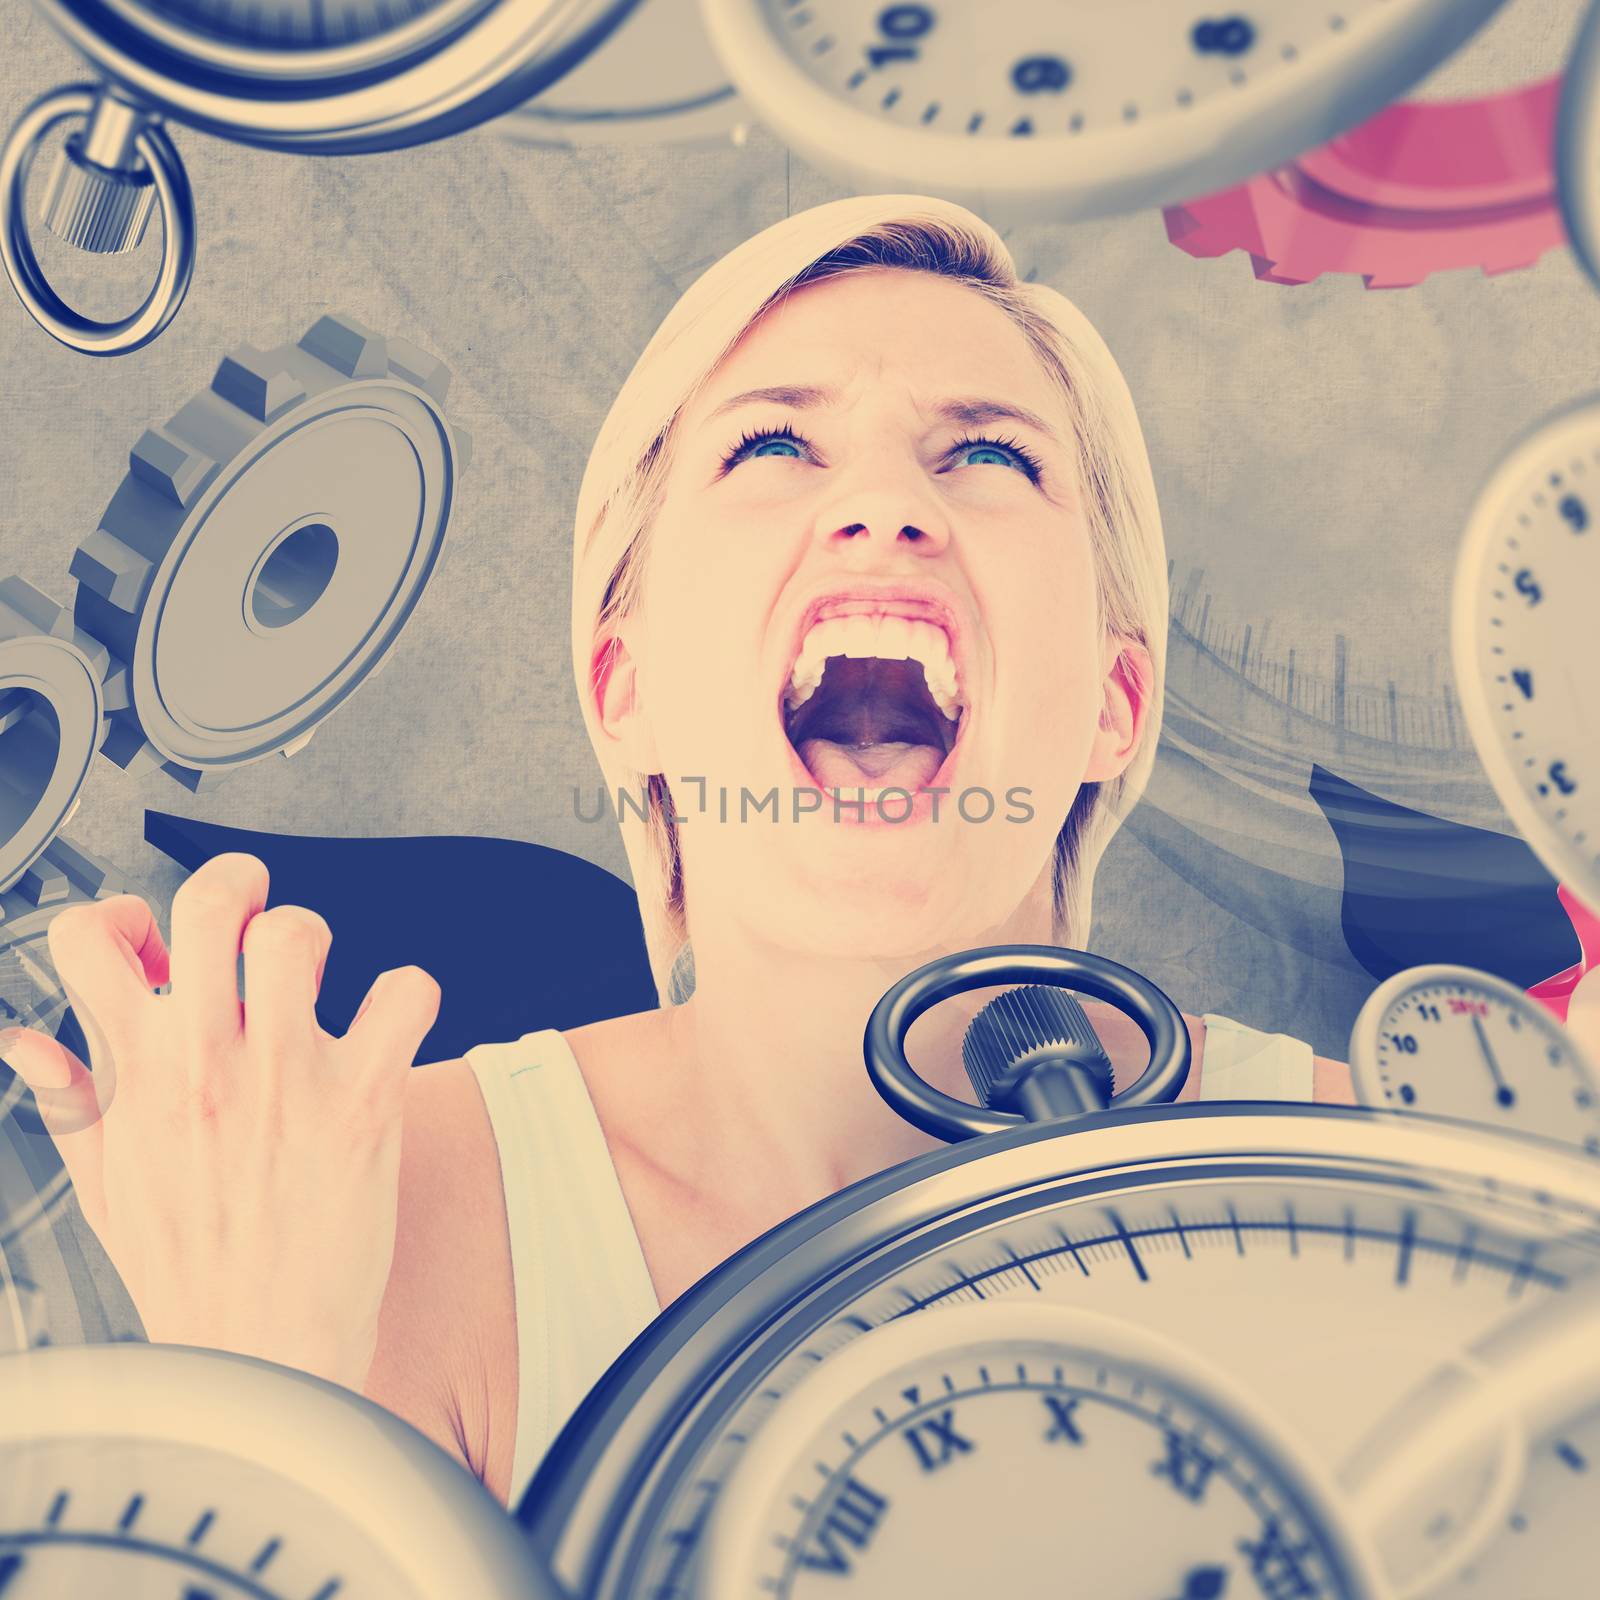 Upset woman screaming with hands up  against grey background